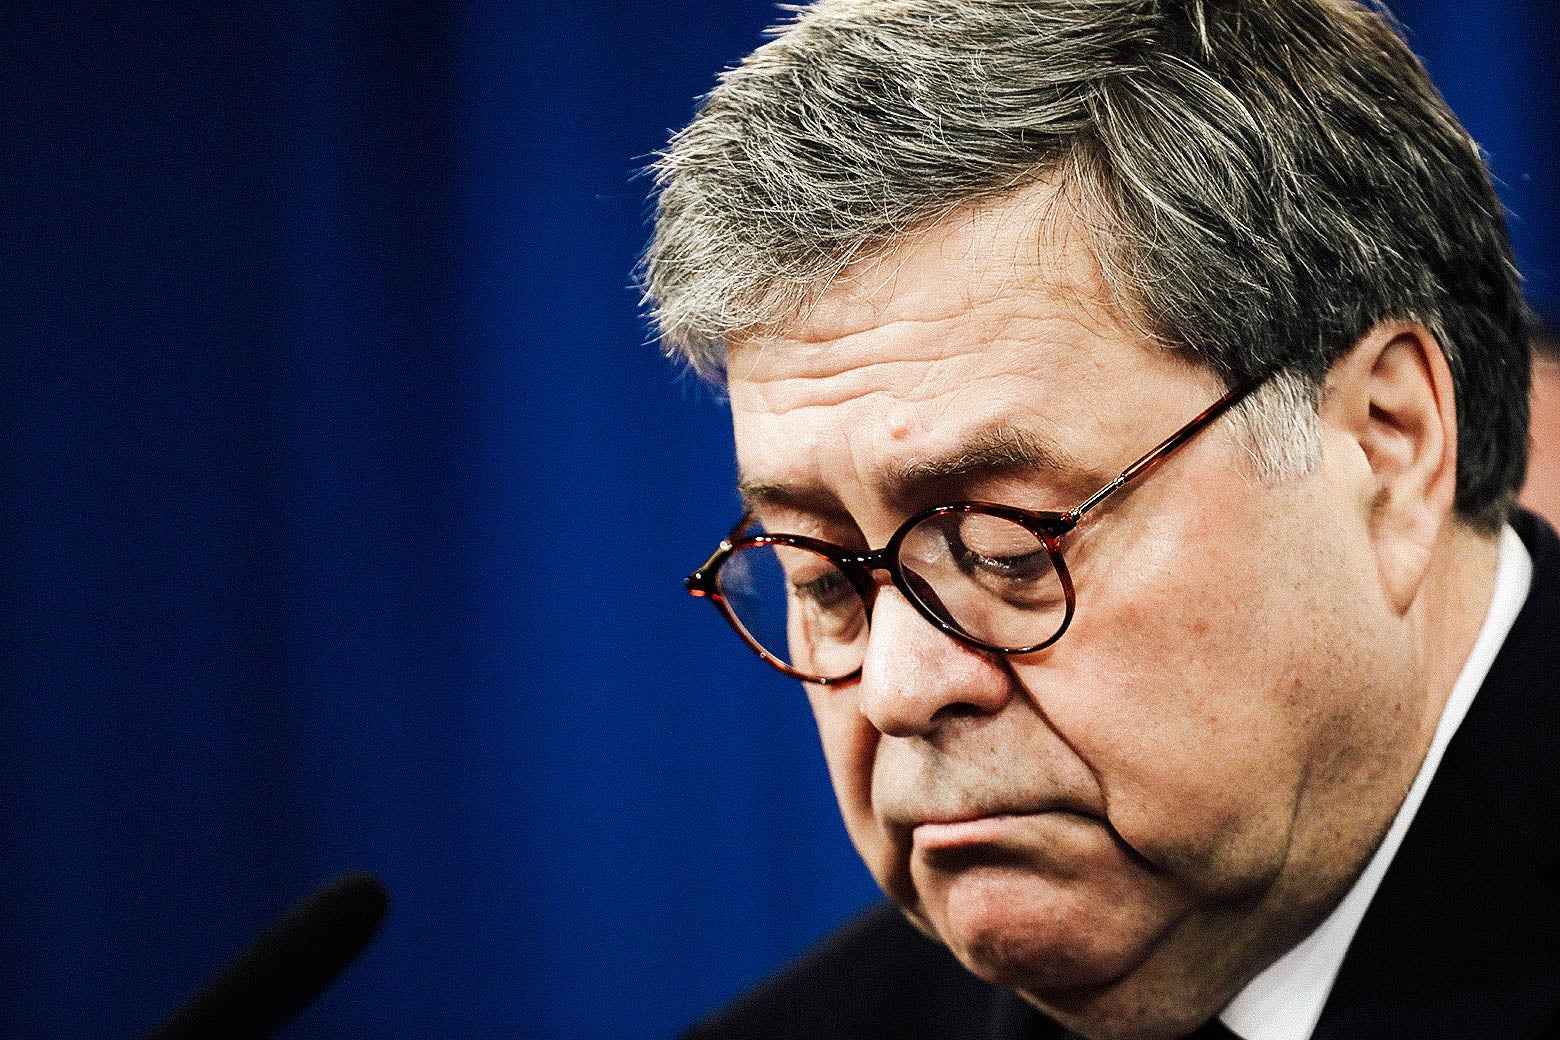 Attorney General William Barr speaks during a press conference about the Mueller report.